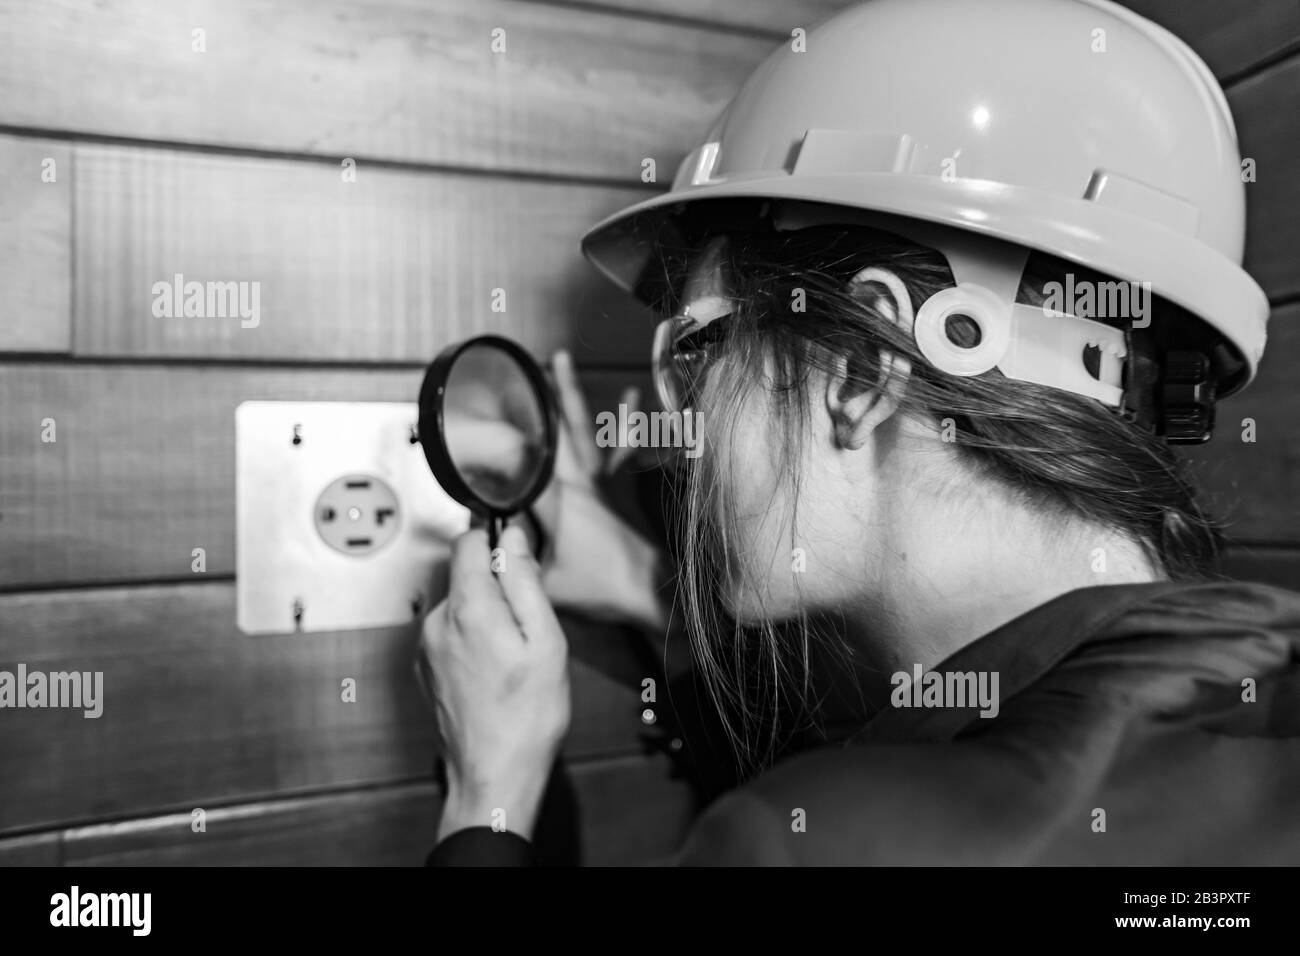 selective focus on construction inspector woman's hand holding a magnifying glass to looking closely at 220v electricity outlet for clothes dryer Stock Photo